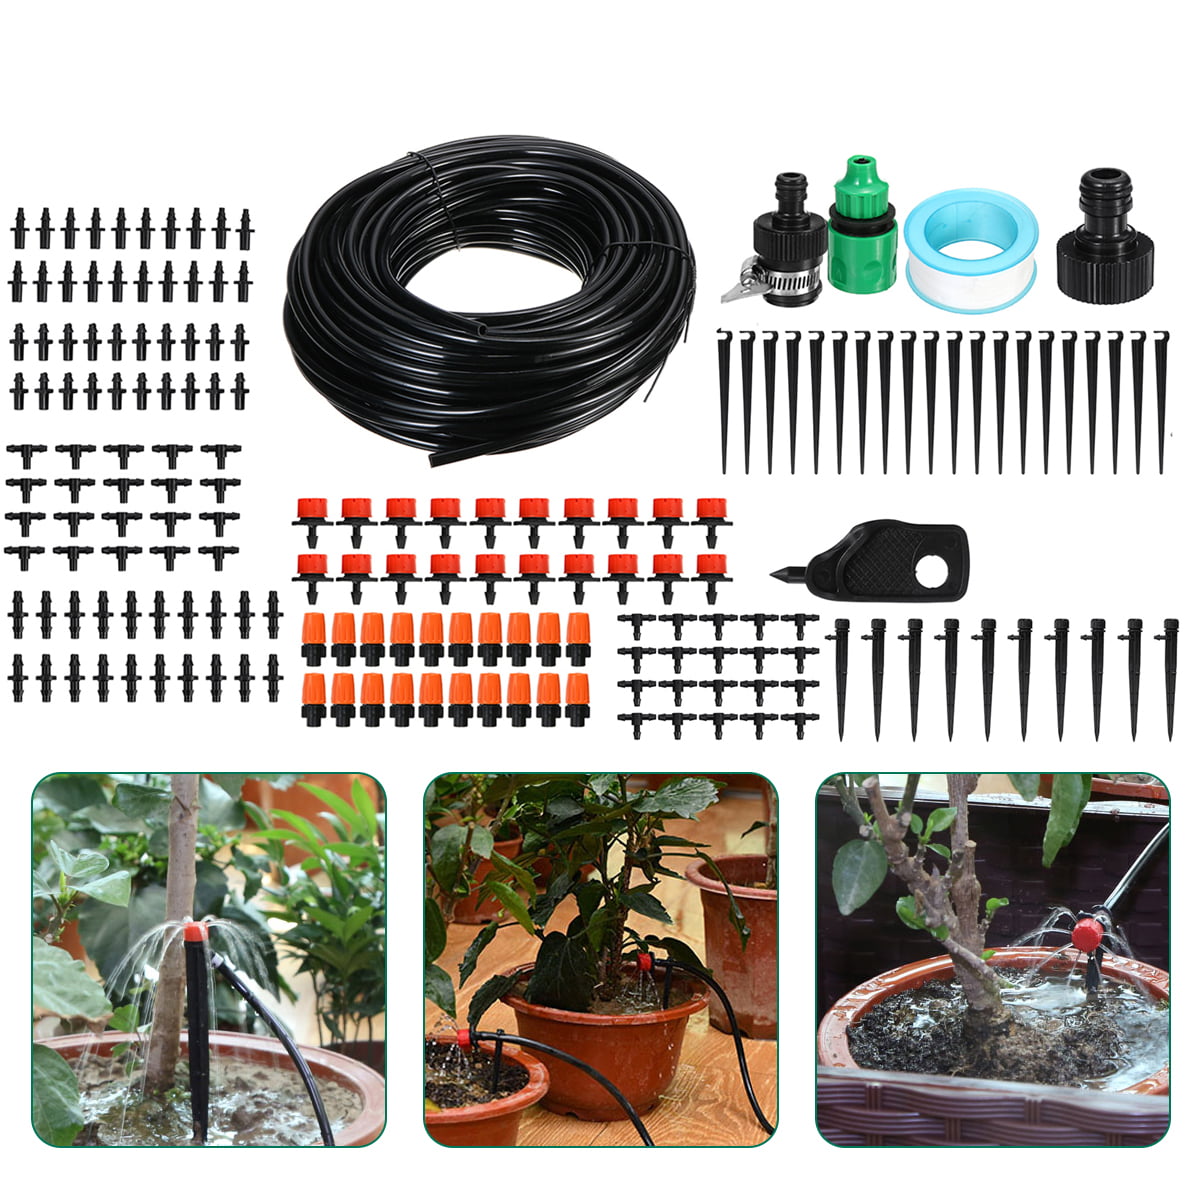 Water Saving Drip Irrigation Tubing Set Yard Drip Irrigation Kit 167pcs Garden Irrigation System with Adjustable Nozzles 82ft Automatic Outdoor Watering Sprinkler System for Flower Bed Greenhouse